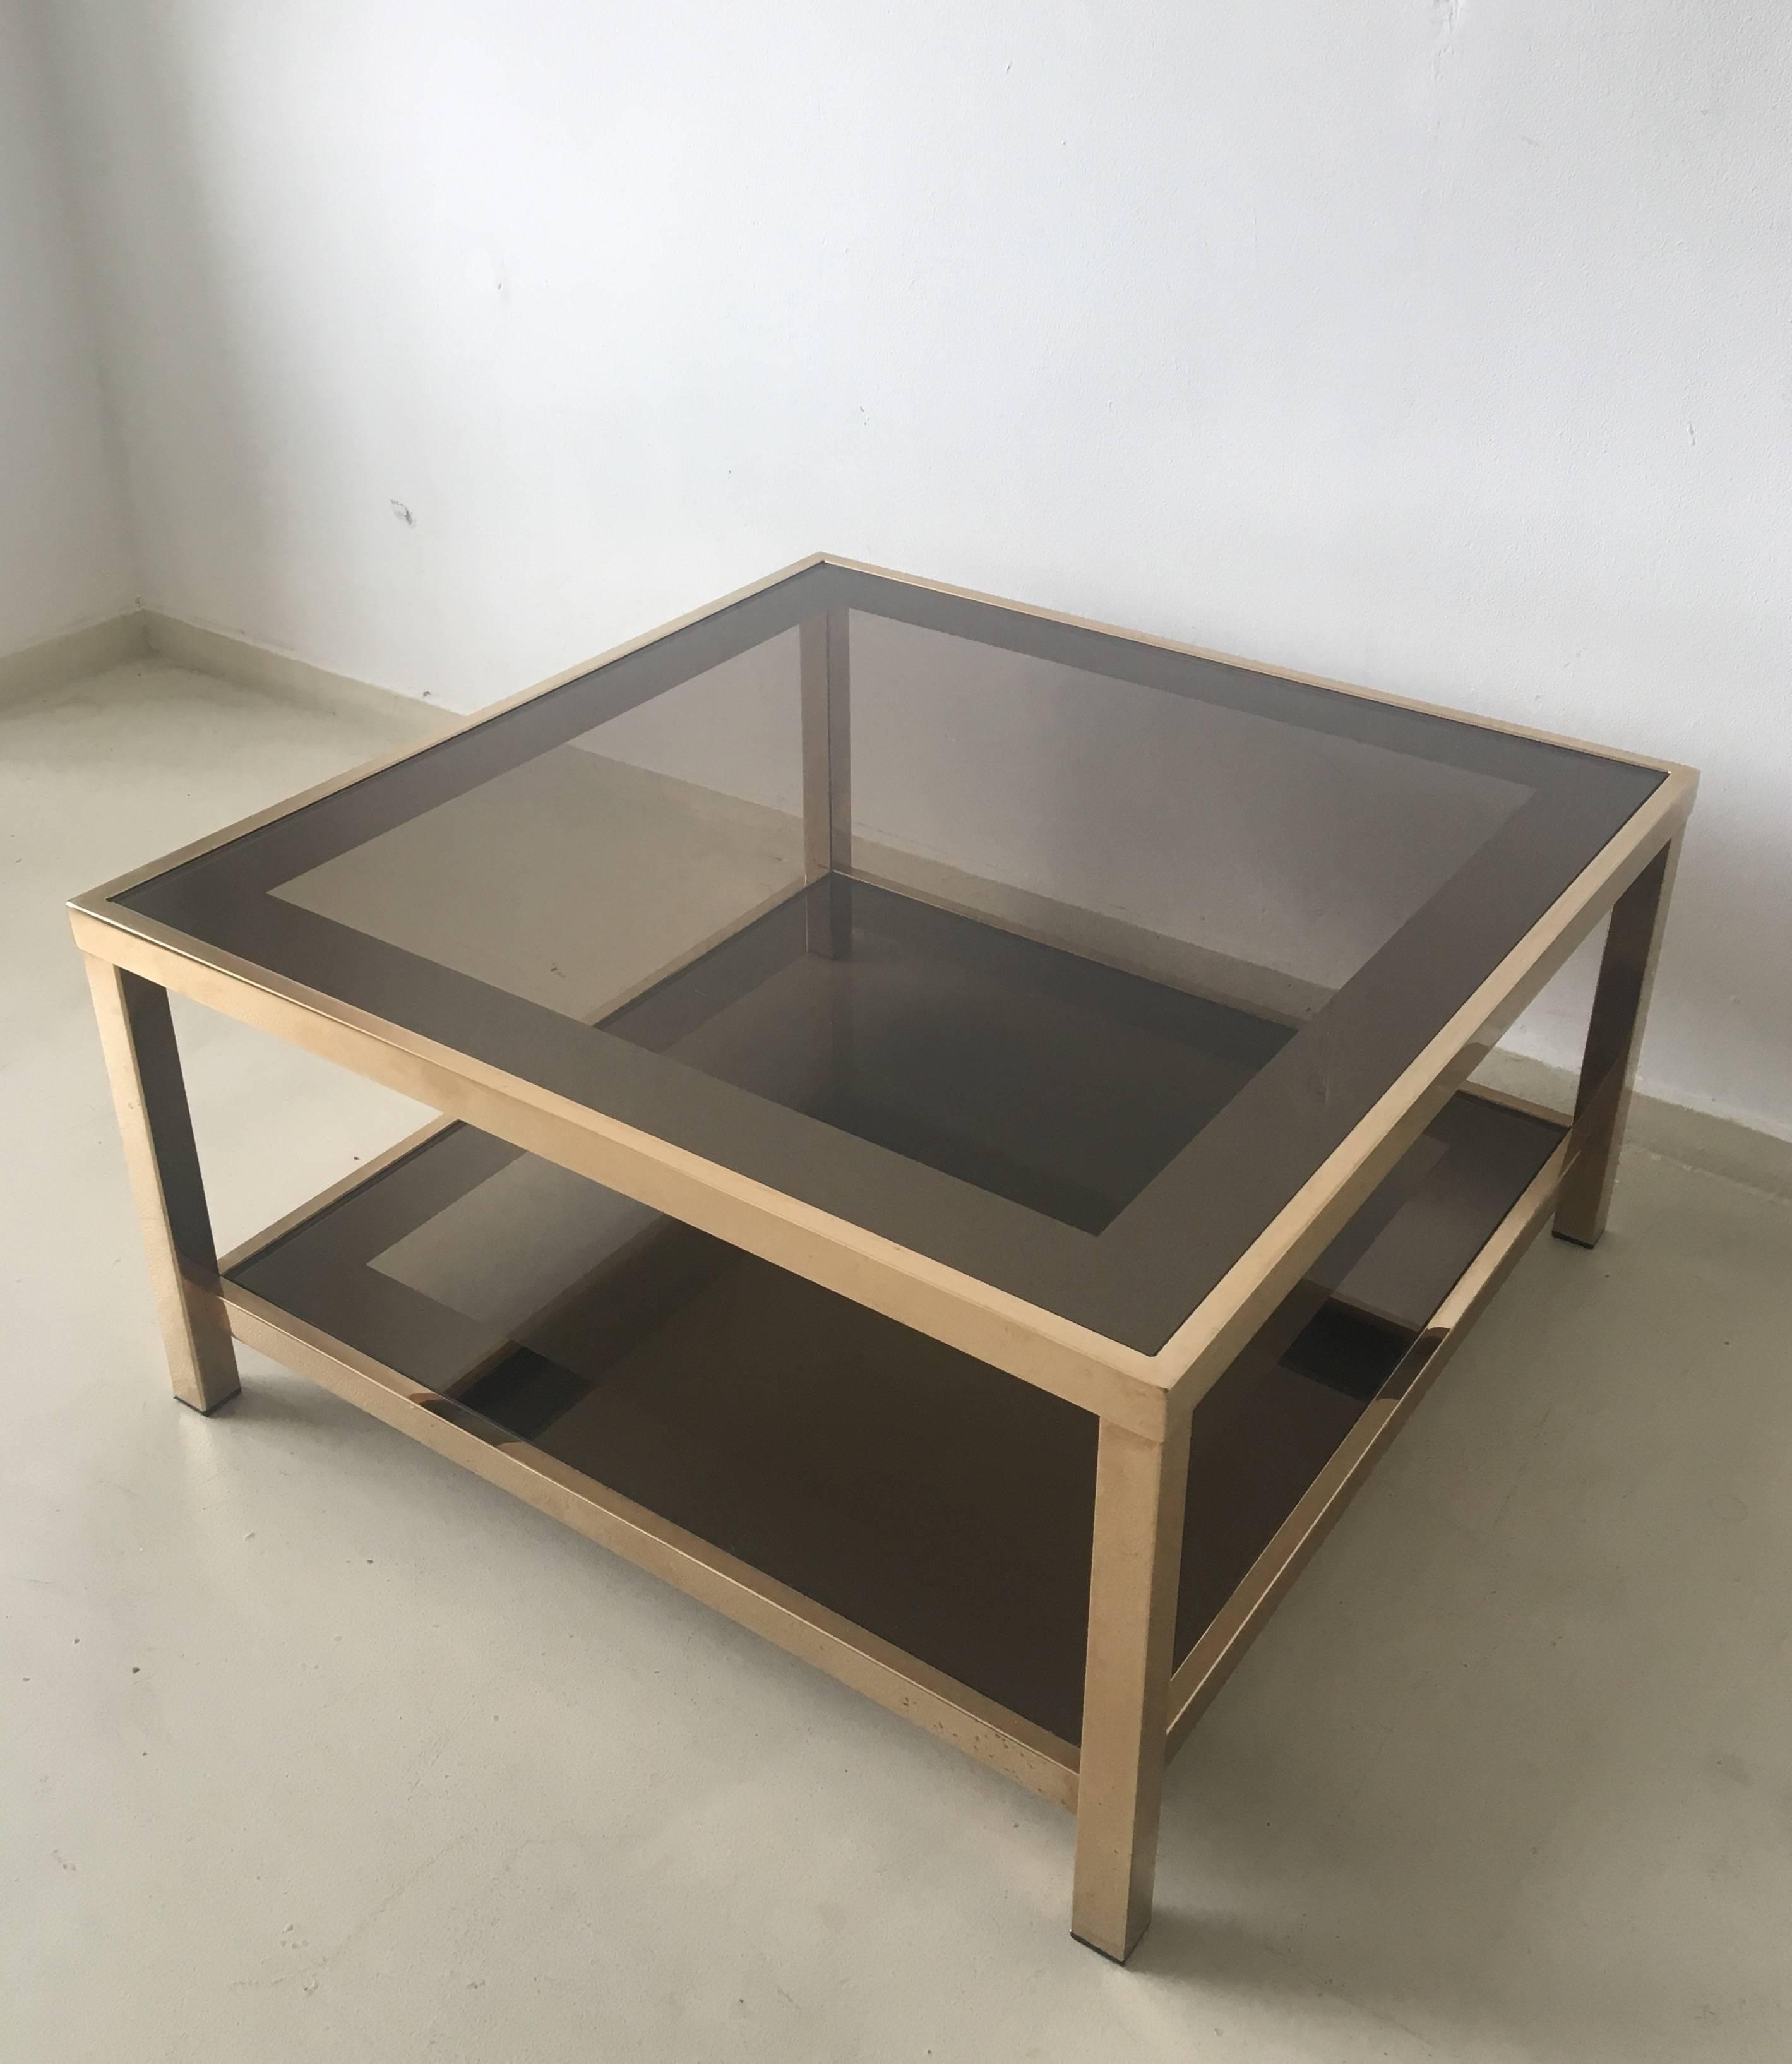 Belgian 23-Carat Rectangular Gold-Plated Coffee Table, 1960s For Sale